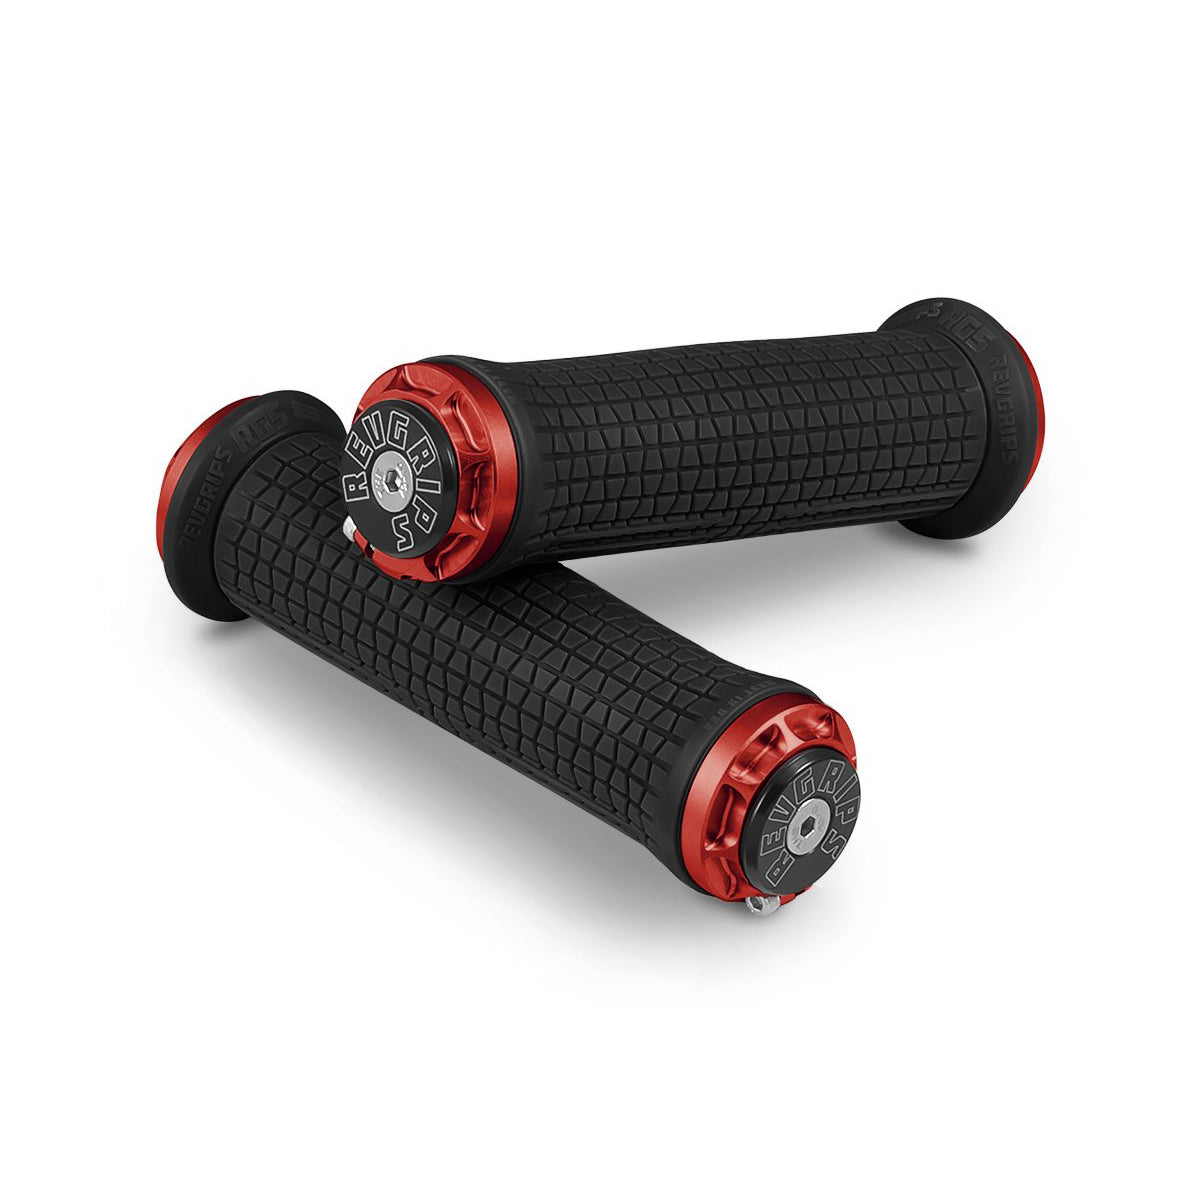 RevGrips Pro Series Grips - Black With Red Clamps - RG6